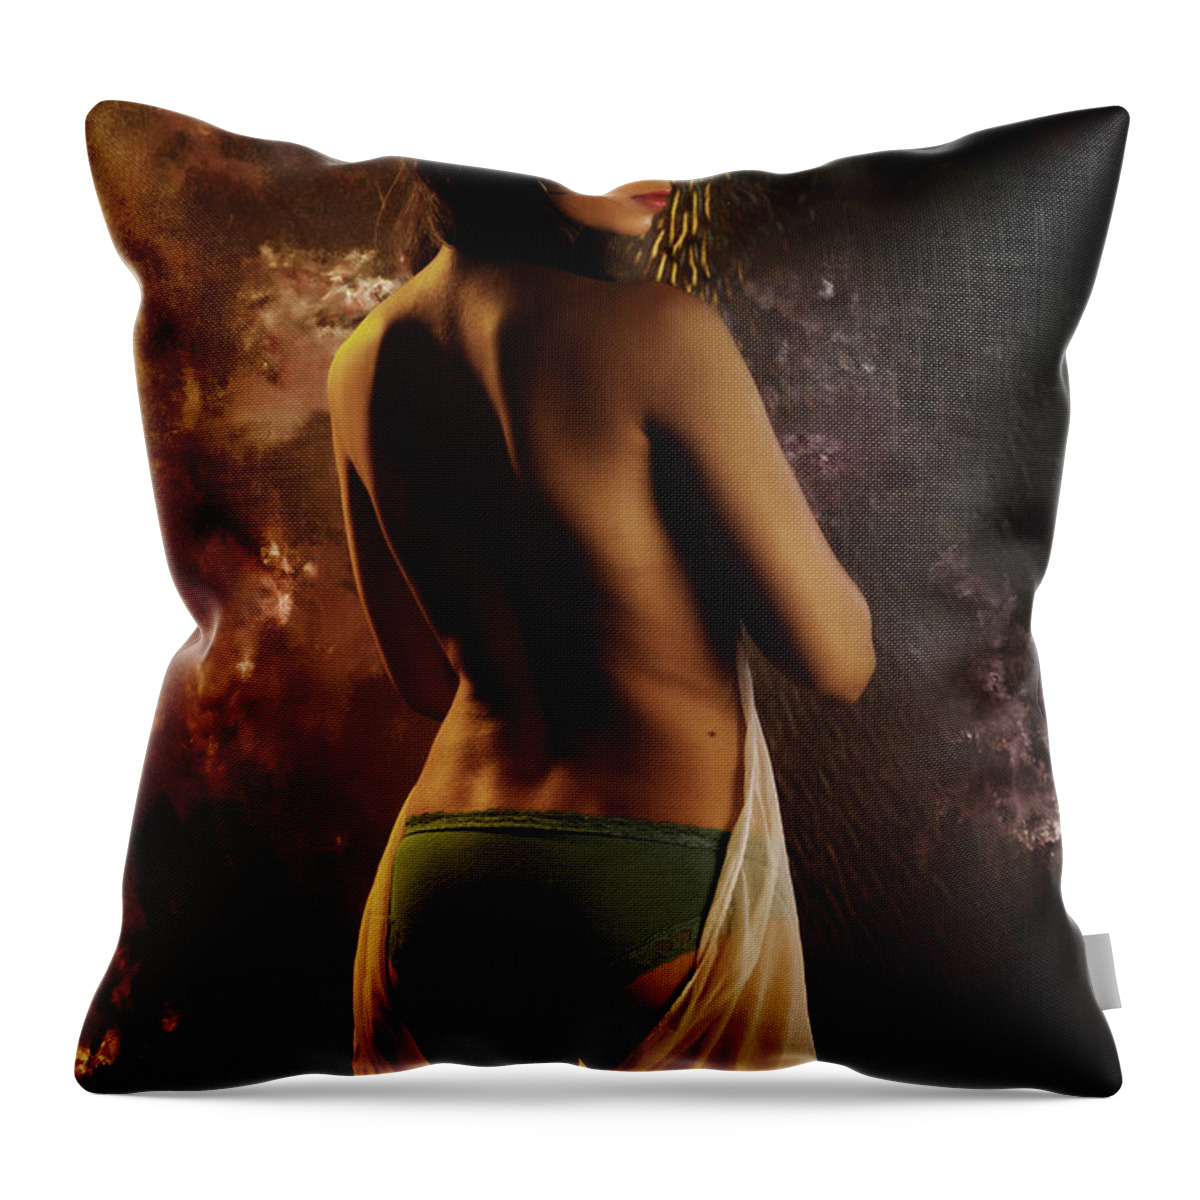 Seductive Throw Pillow featuring the photograph Topless nude showing back #1 by Kiran Joshi